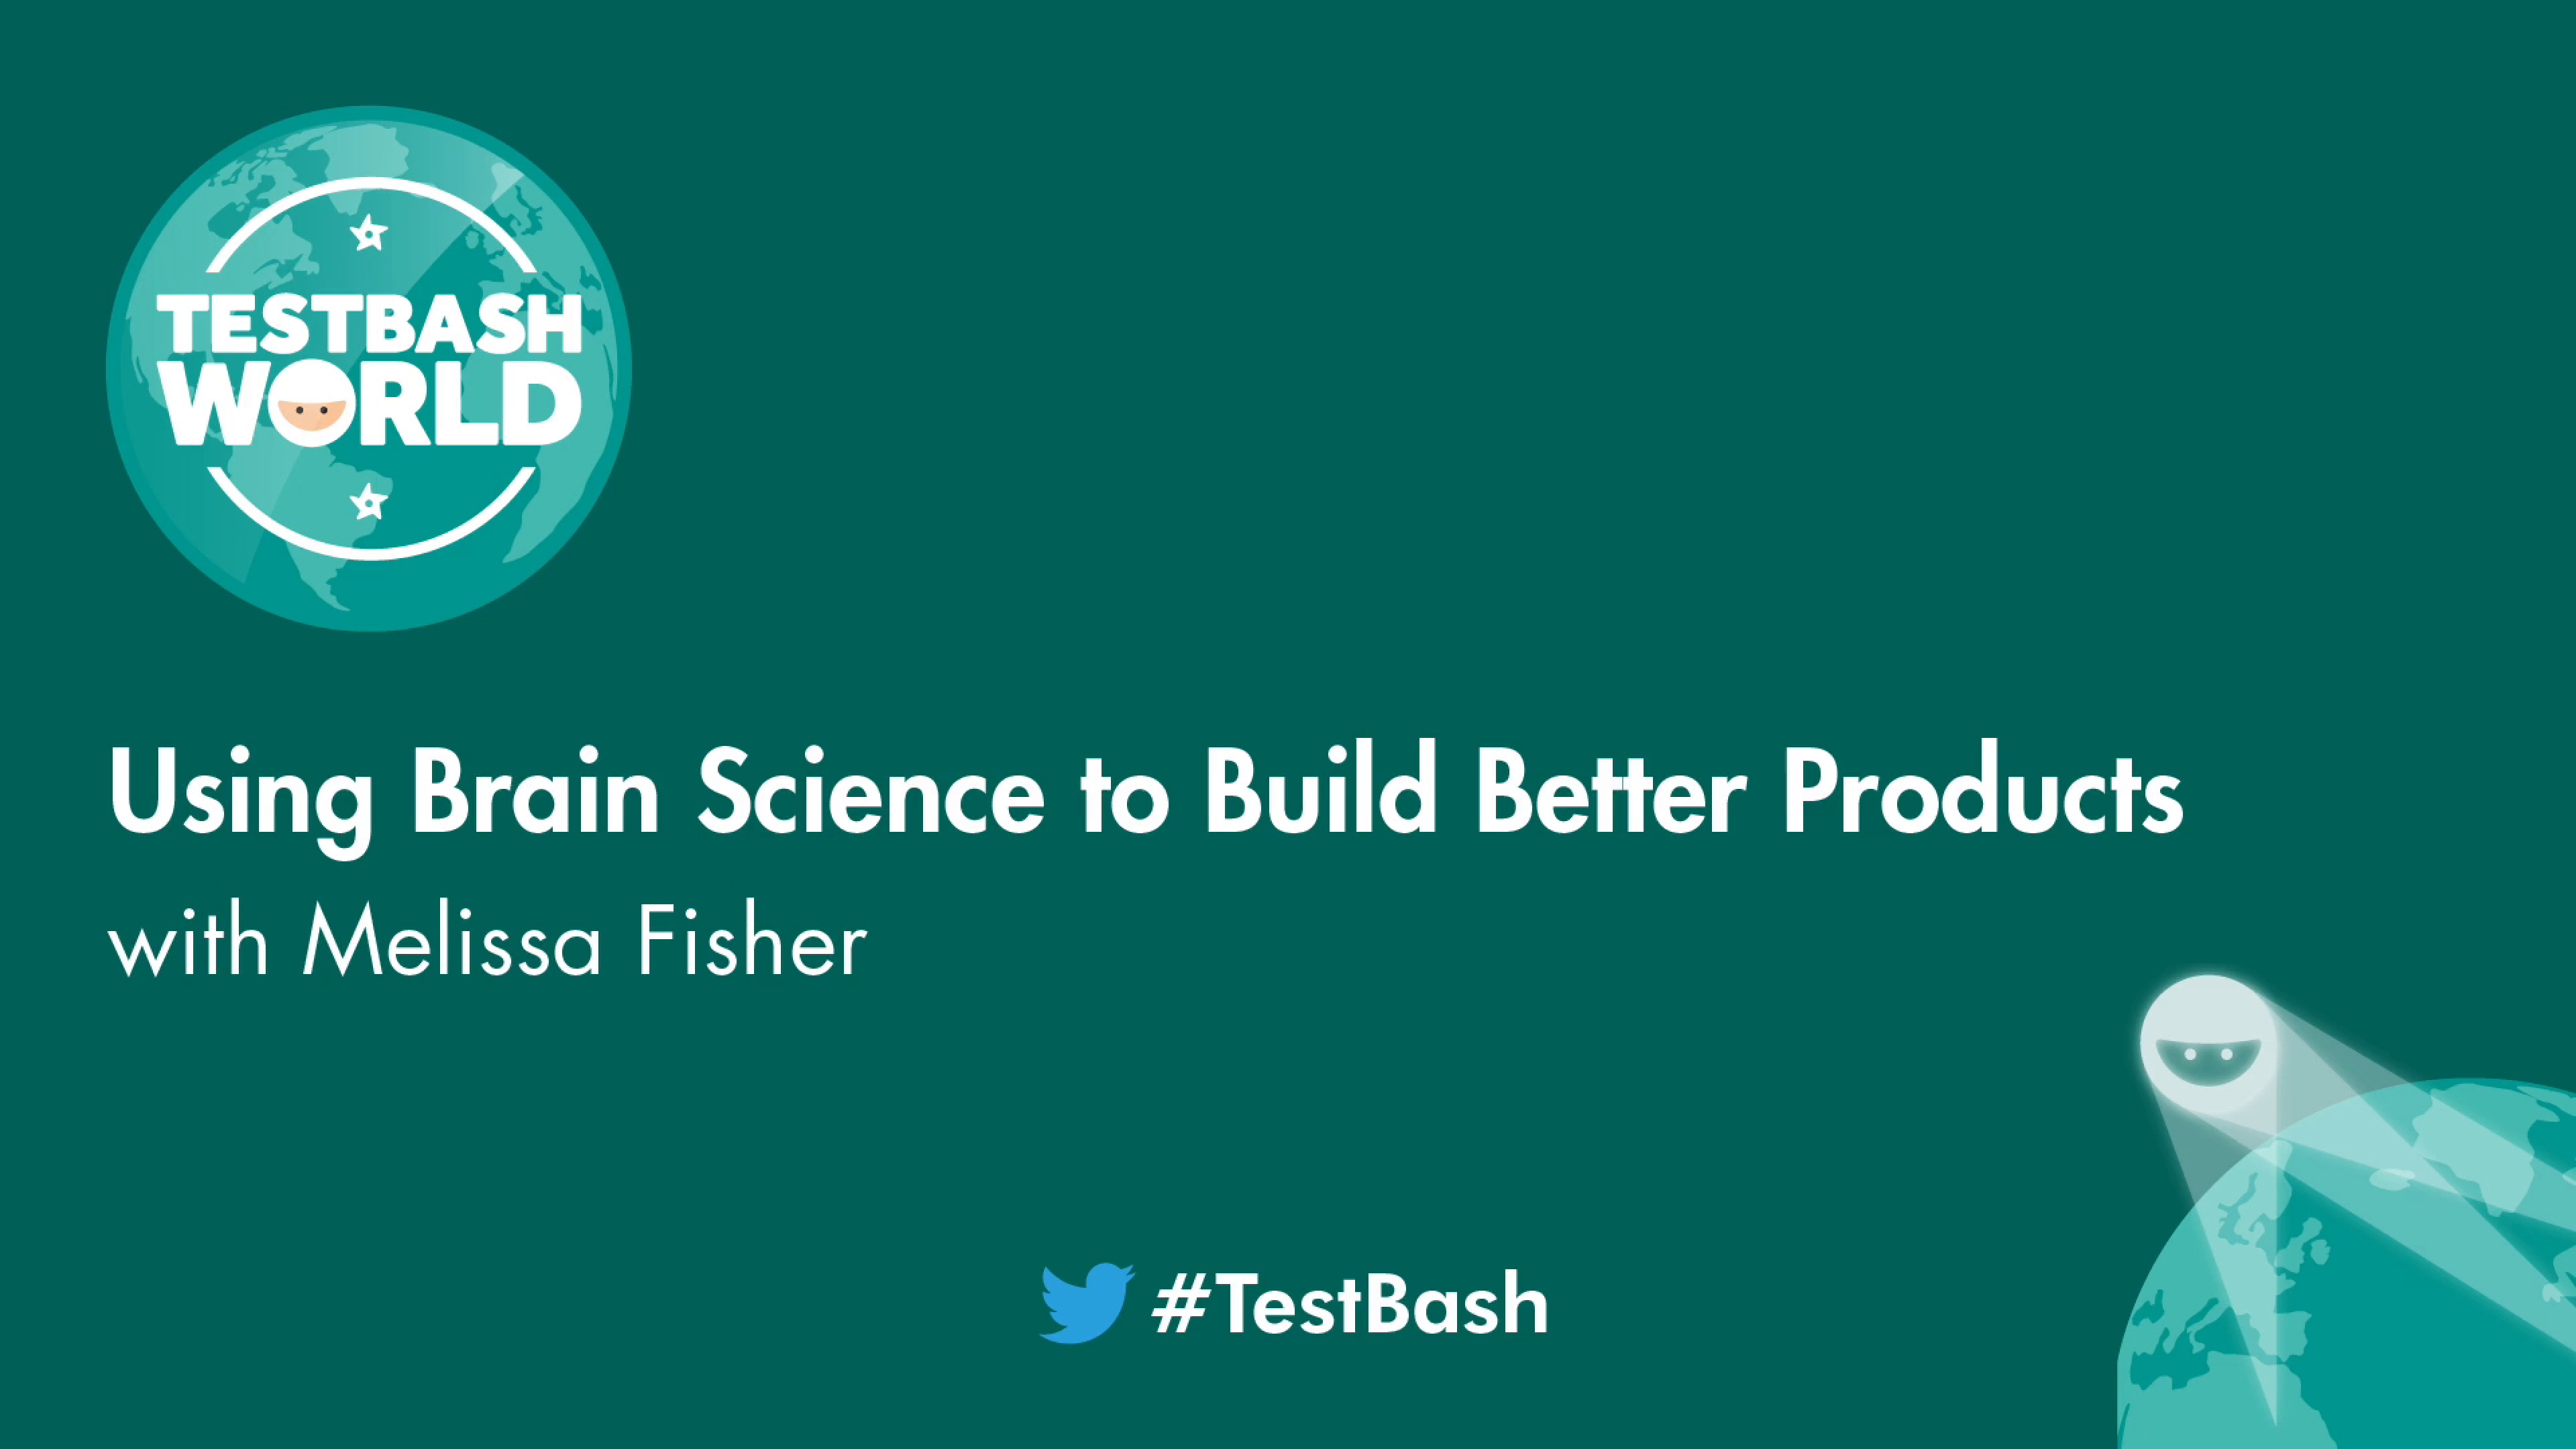 Using Brain Science to Build Better Products - Melissa Fisher